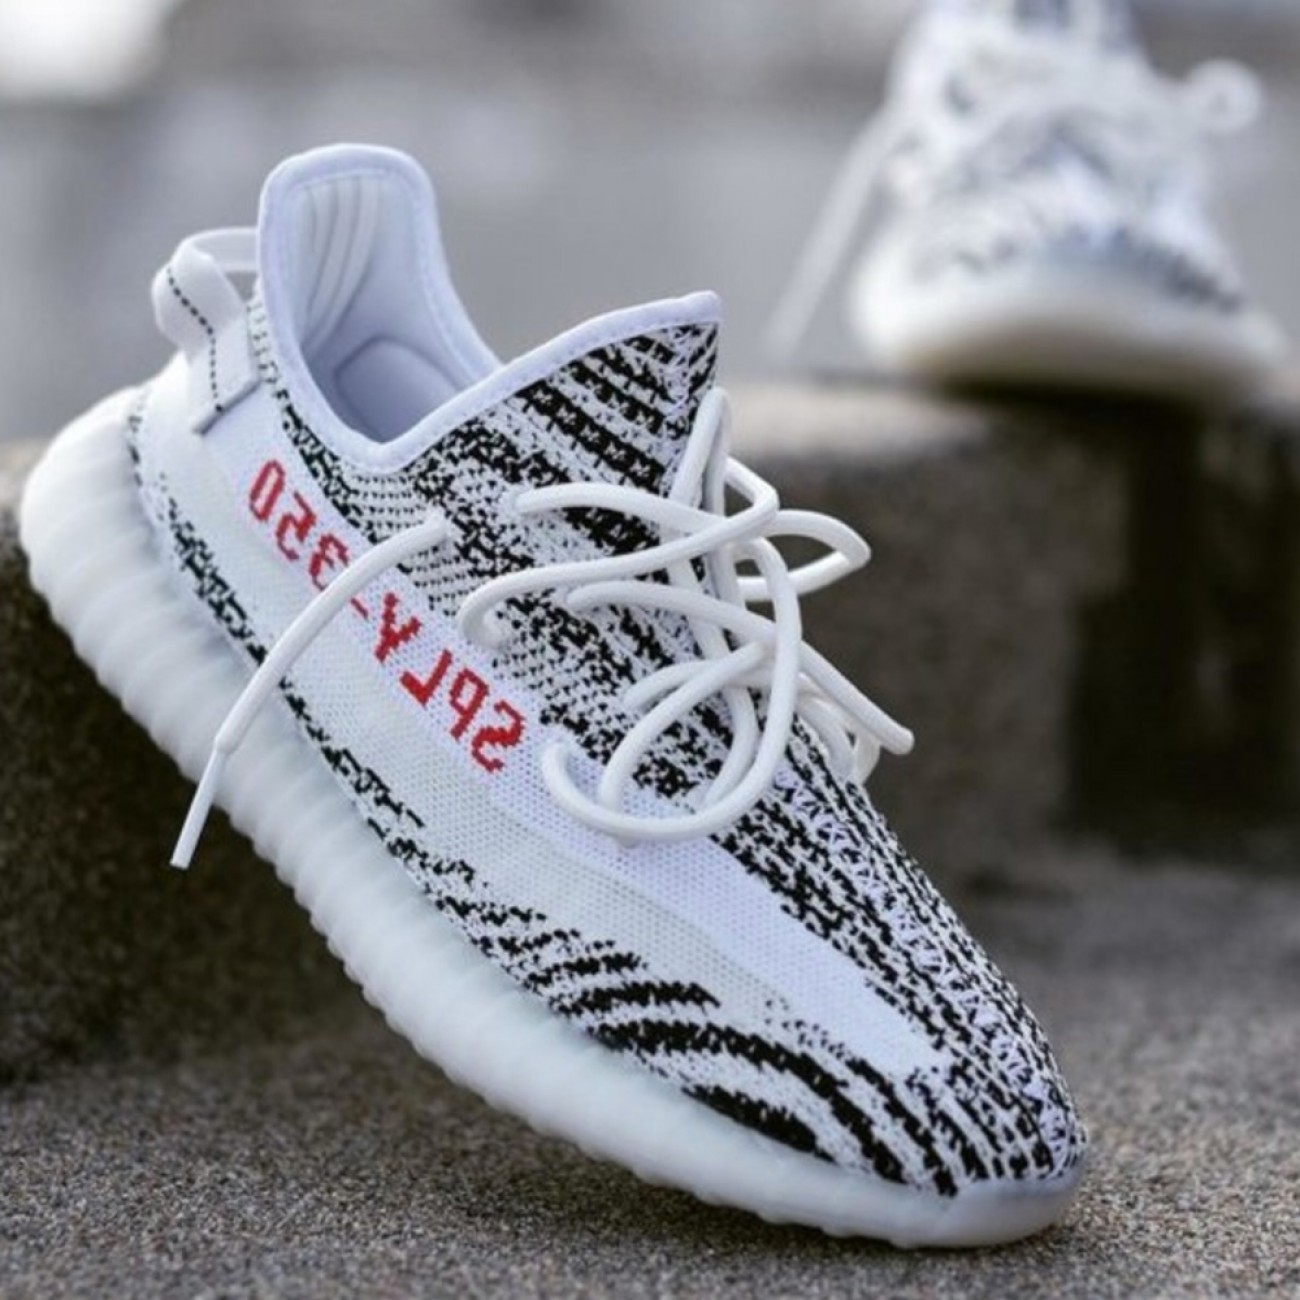 adidas Yeezy Boost 350 V2 "Zebra" CP9654 Outfit 2019 Resell Release Date